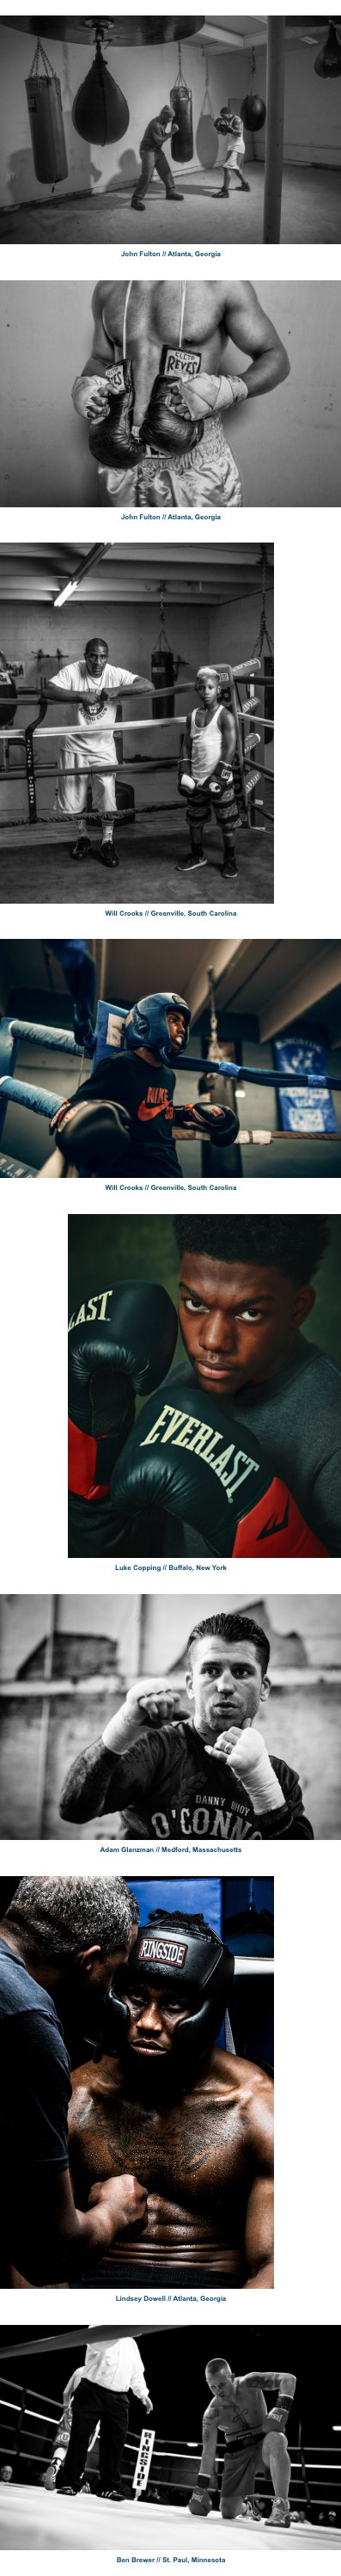 screenshot showing sports/fitness photography in Creative in Place: The Sweet Science